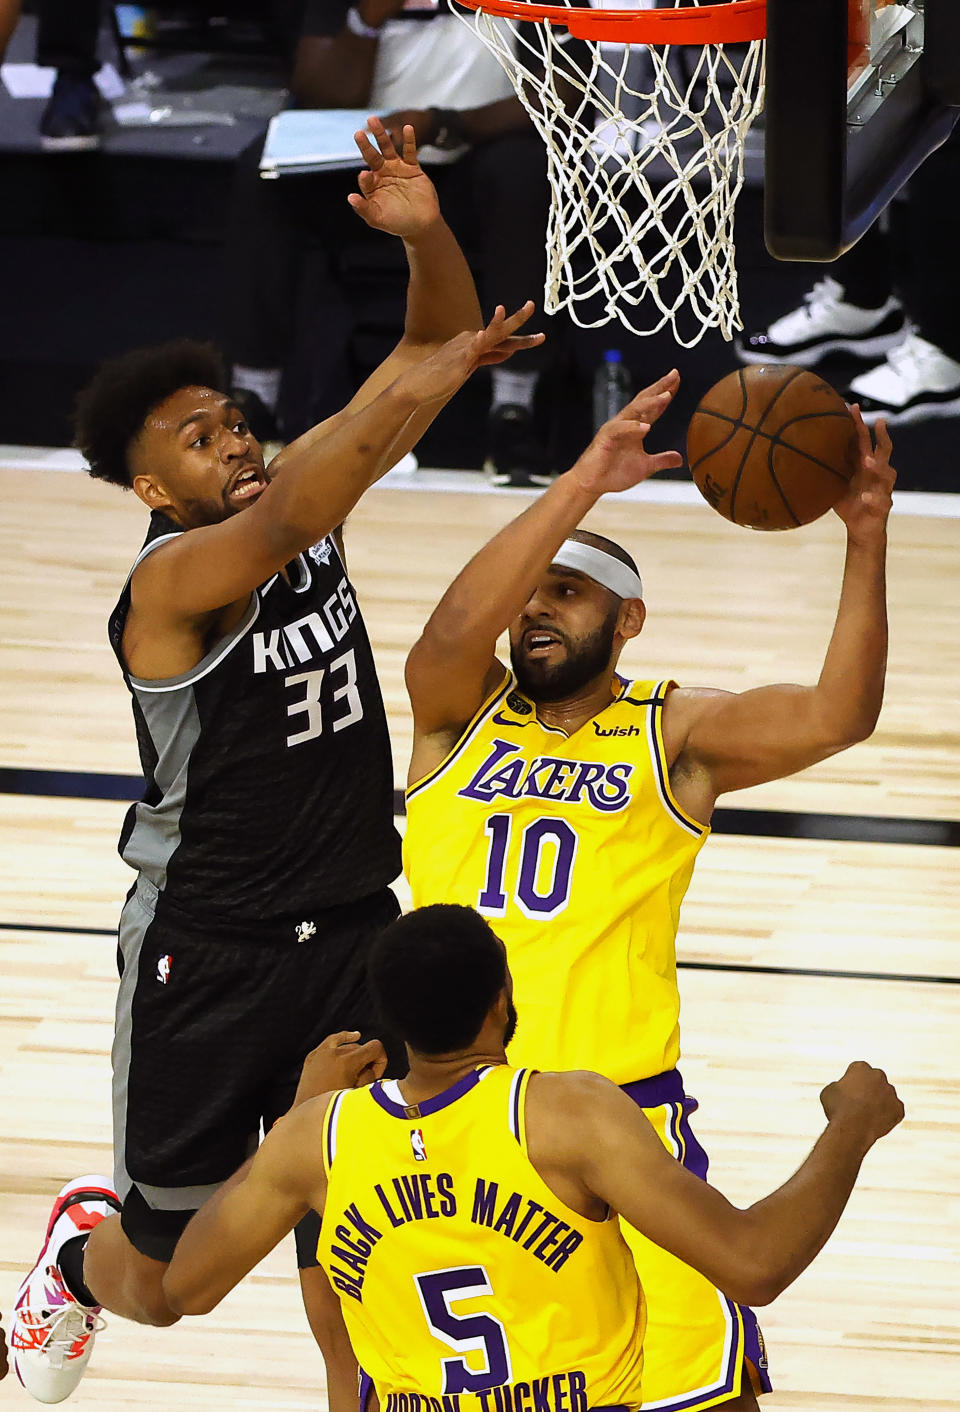 Los Angeles Lakers' Jared Dudley (10) goes up for a shot against Sacramento Kings' Jabari Parker (33) during the second quarter of an NBA basketball game Thursday, Aug. 13, 2020, in Lake Buena Vista, Fla. (Kevin C. Cox/Pool Photo via AP)